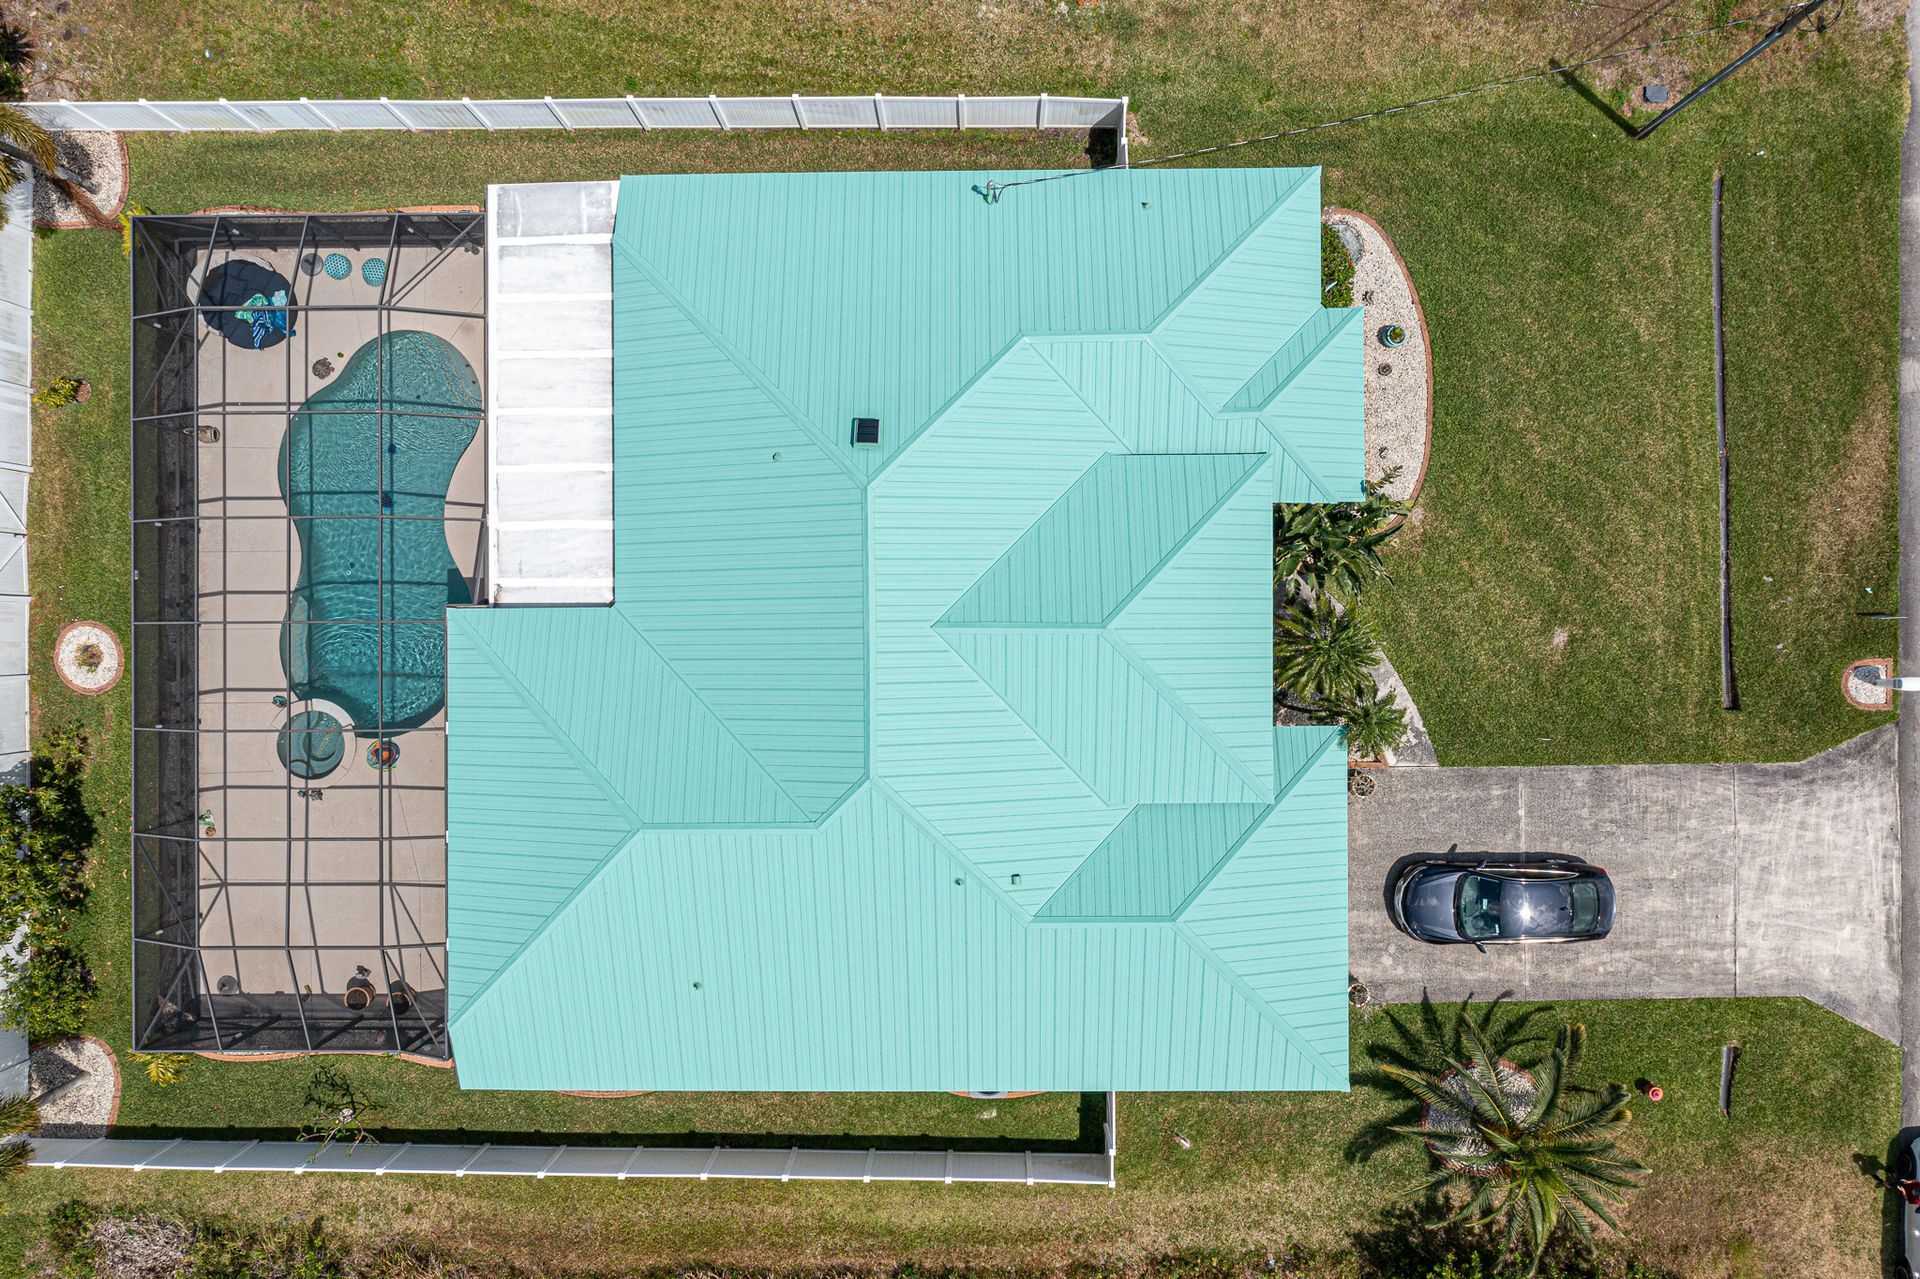 An aerial view of a house with a green roof and a pool.